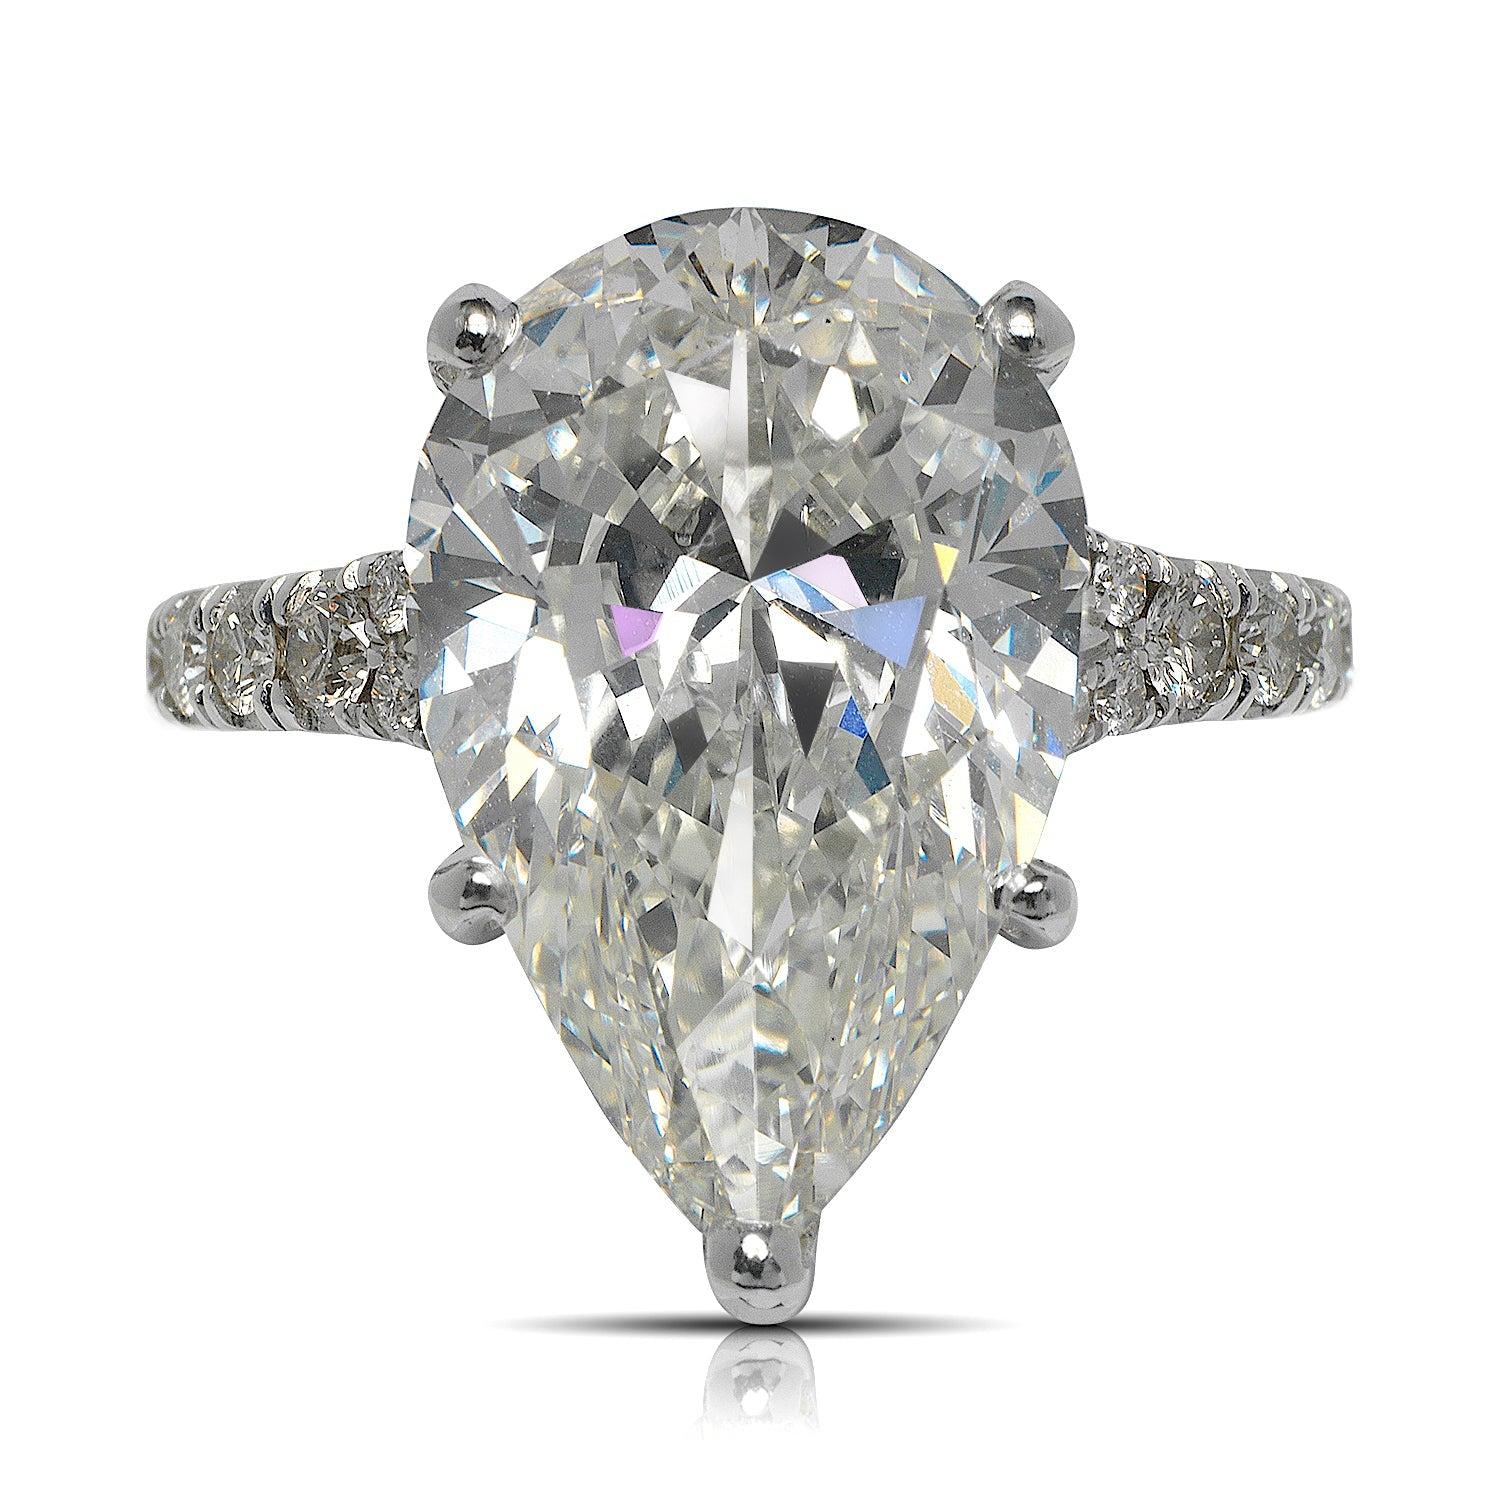 PLAMA  PEAR SHAPE 5 PRONG  DIAMOND ENGAGEMENT RING 18K WHITE GOLD  BY MIKE NEKTA

GIA CERTIFIED 
Center Diamond
Carat Weight: 7 Carats
Color :  J*
Clarity: VVS2
Style: PEAR BRILLIANT
Approximate Measurements: 16.6 x 10.7 x 6.5 mm
* This diamond has